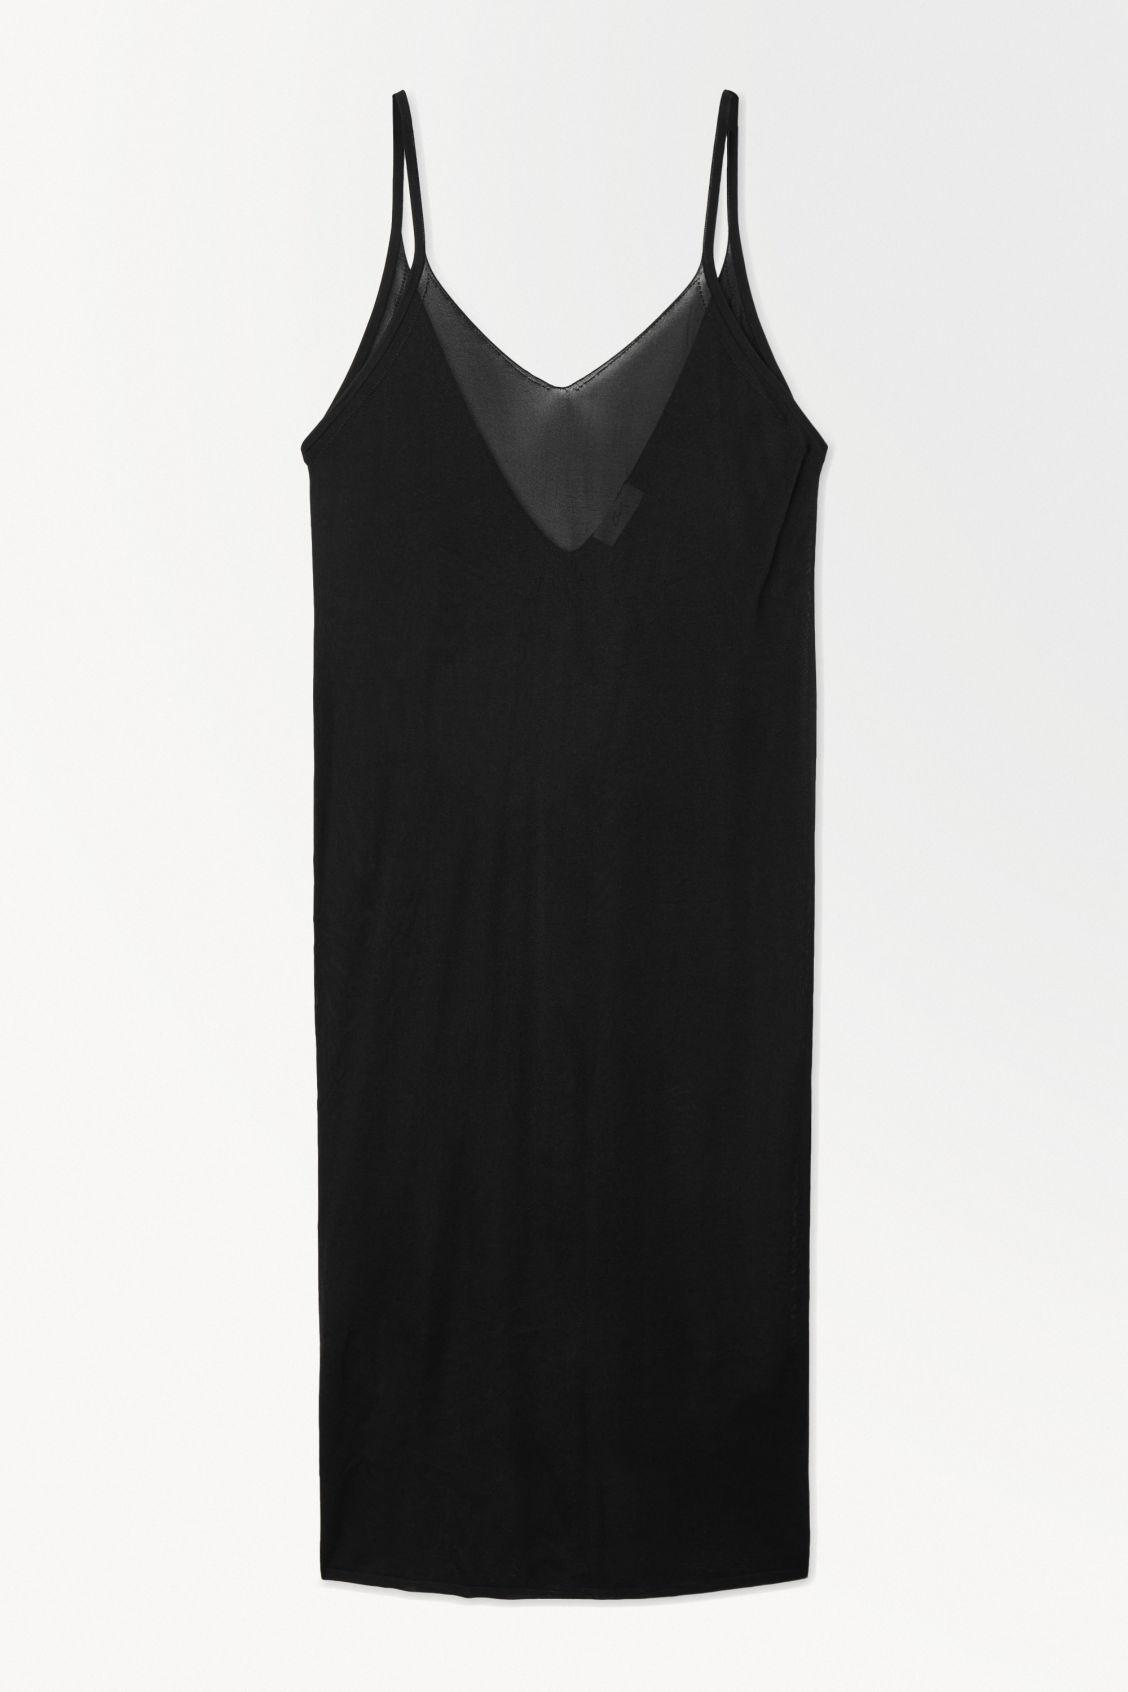 COS The Sheer Knitted Slip Dress in Black | Lyst